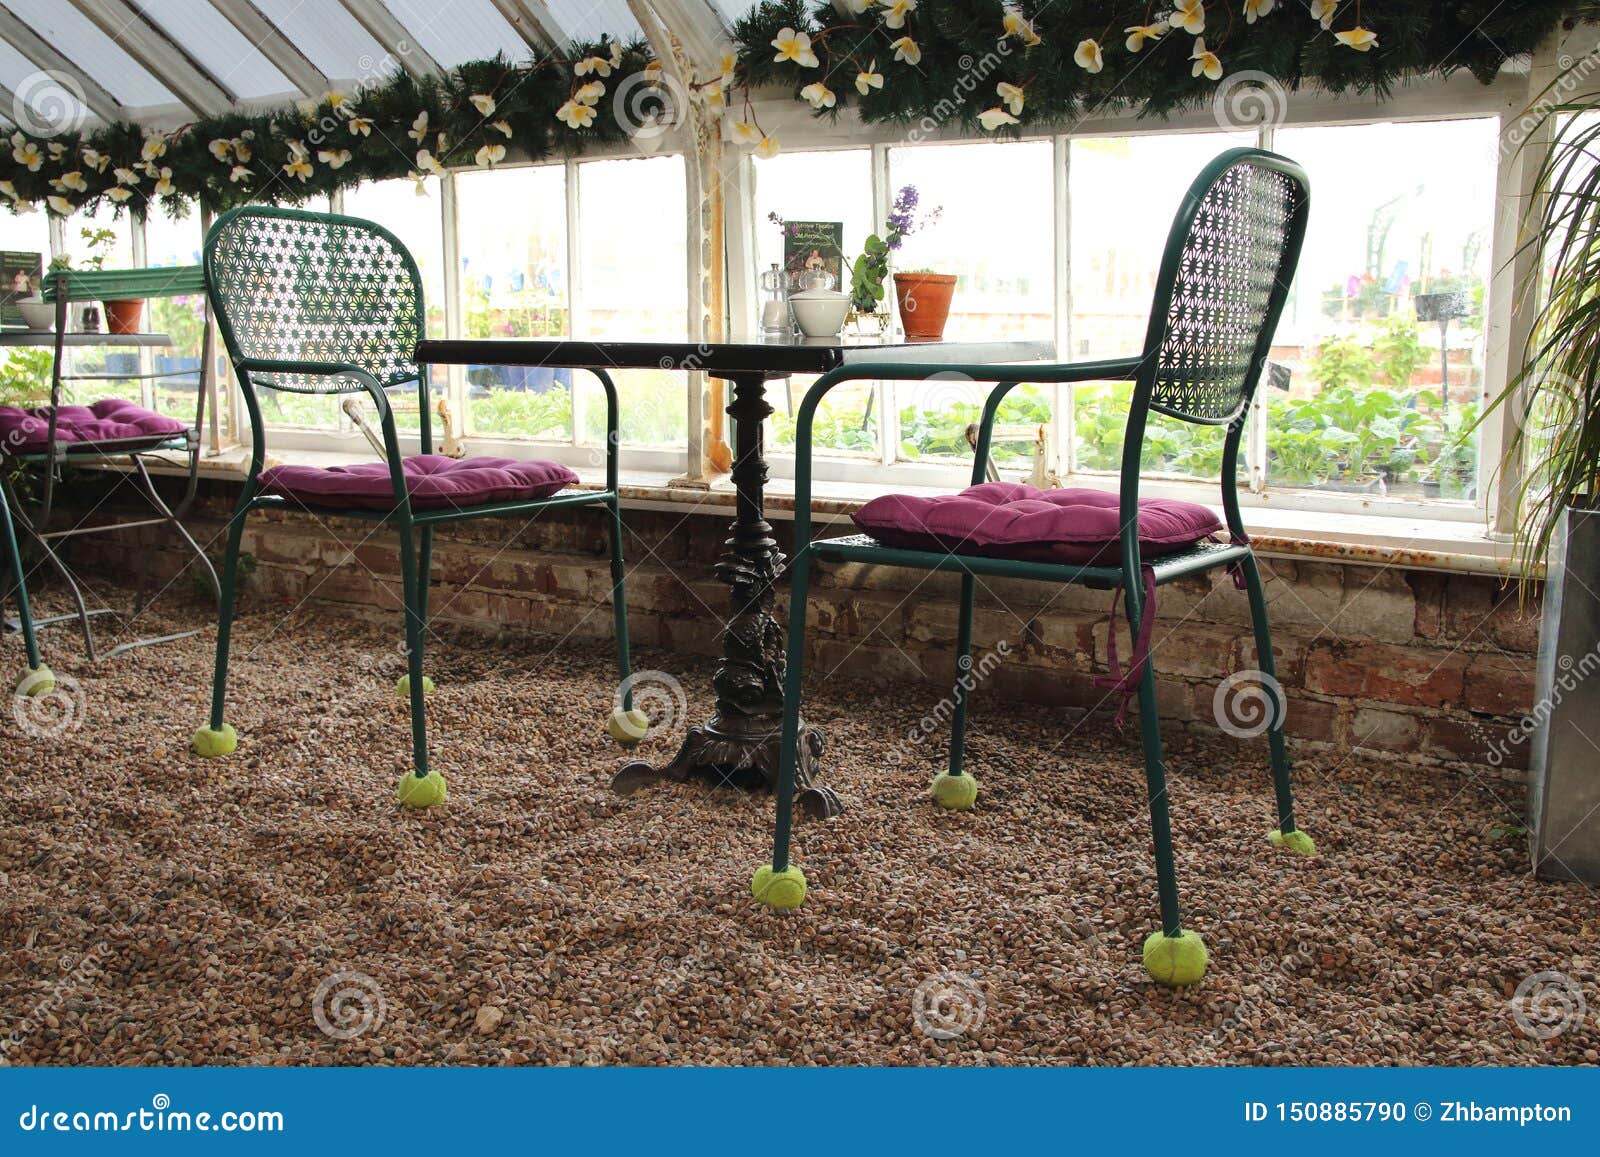 Metal Table And Chairs In A Garden Centre Coffee Shop Stock Photo